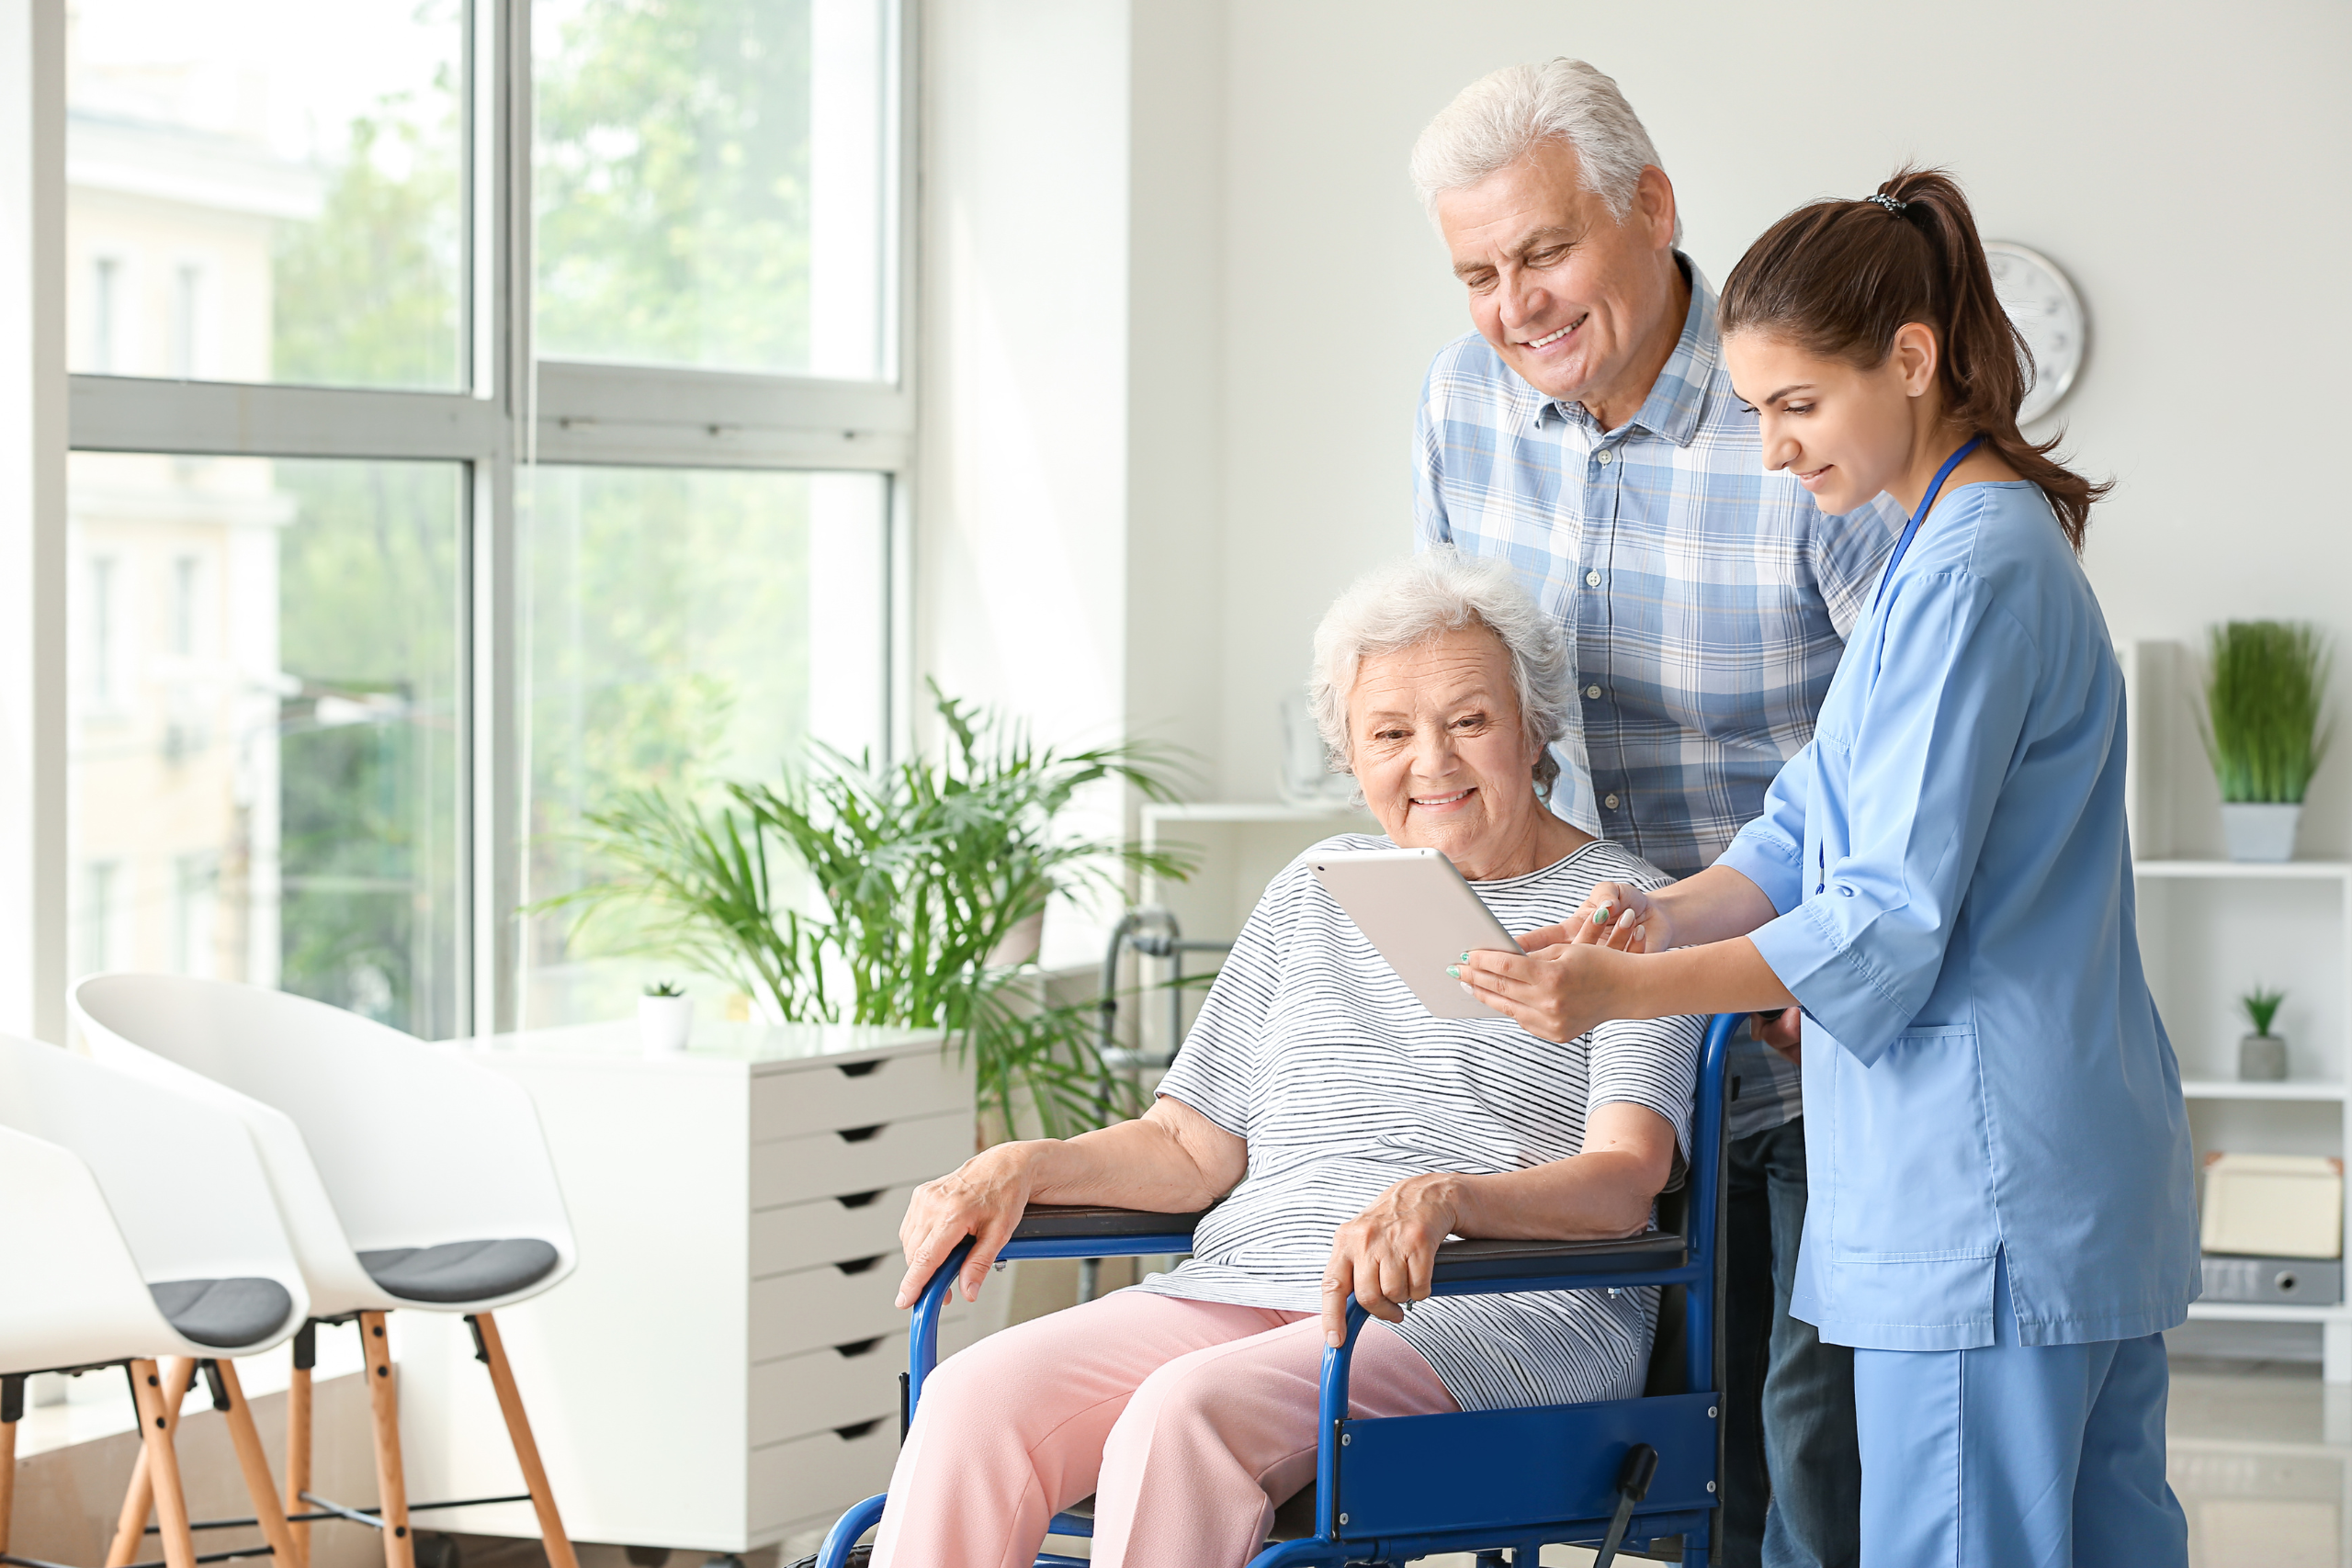 Elderly woman in a wheelchair smiling while looking at a tablet with a healthcare worker, as a senior man stands behind her, depicting a family involved in care decisions, emphasizing the theme of being an advocate for loved ones.